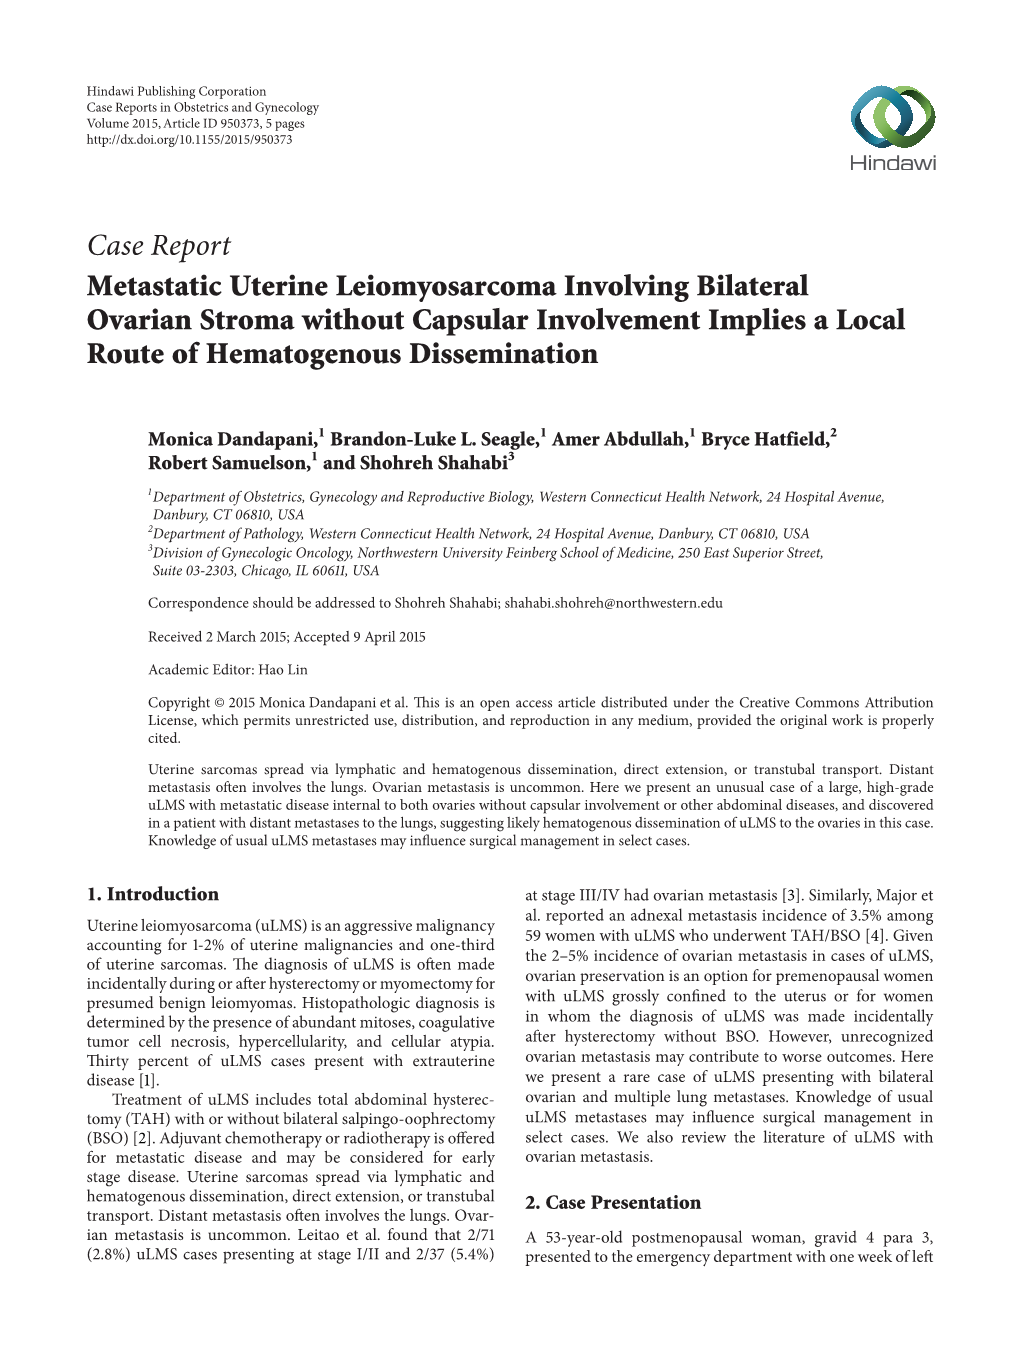 Case Report Metastatic Uterine Leiomyosarcoma Involving Bilateral Ovarian Stroma Without Capsular Involvement Implies a Local Route of Hematogenous Dissemination